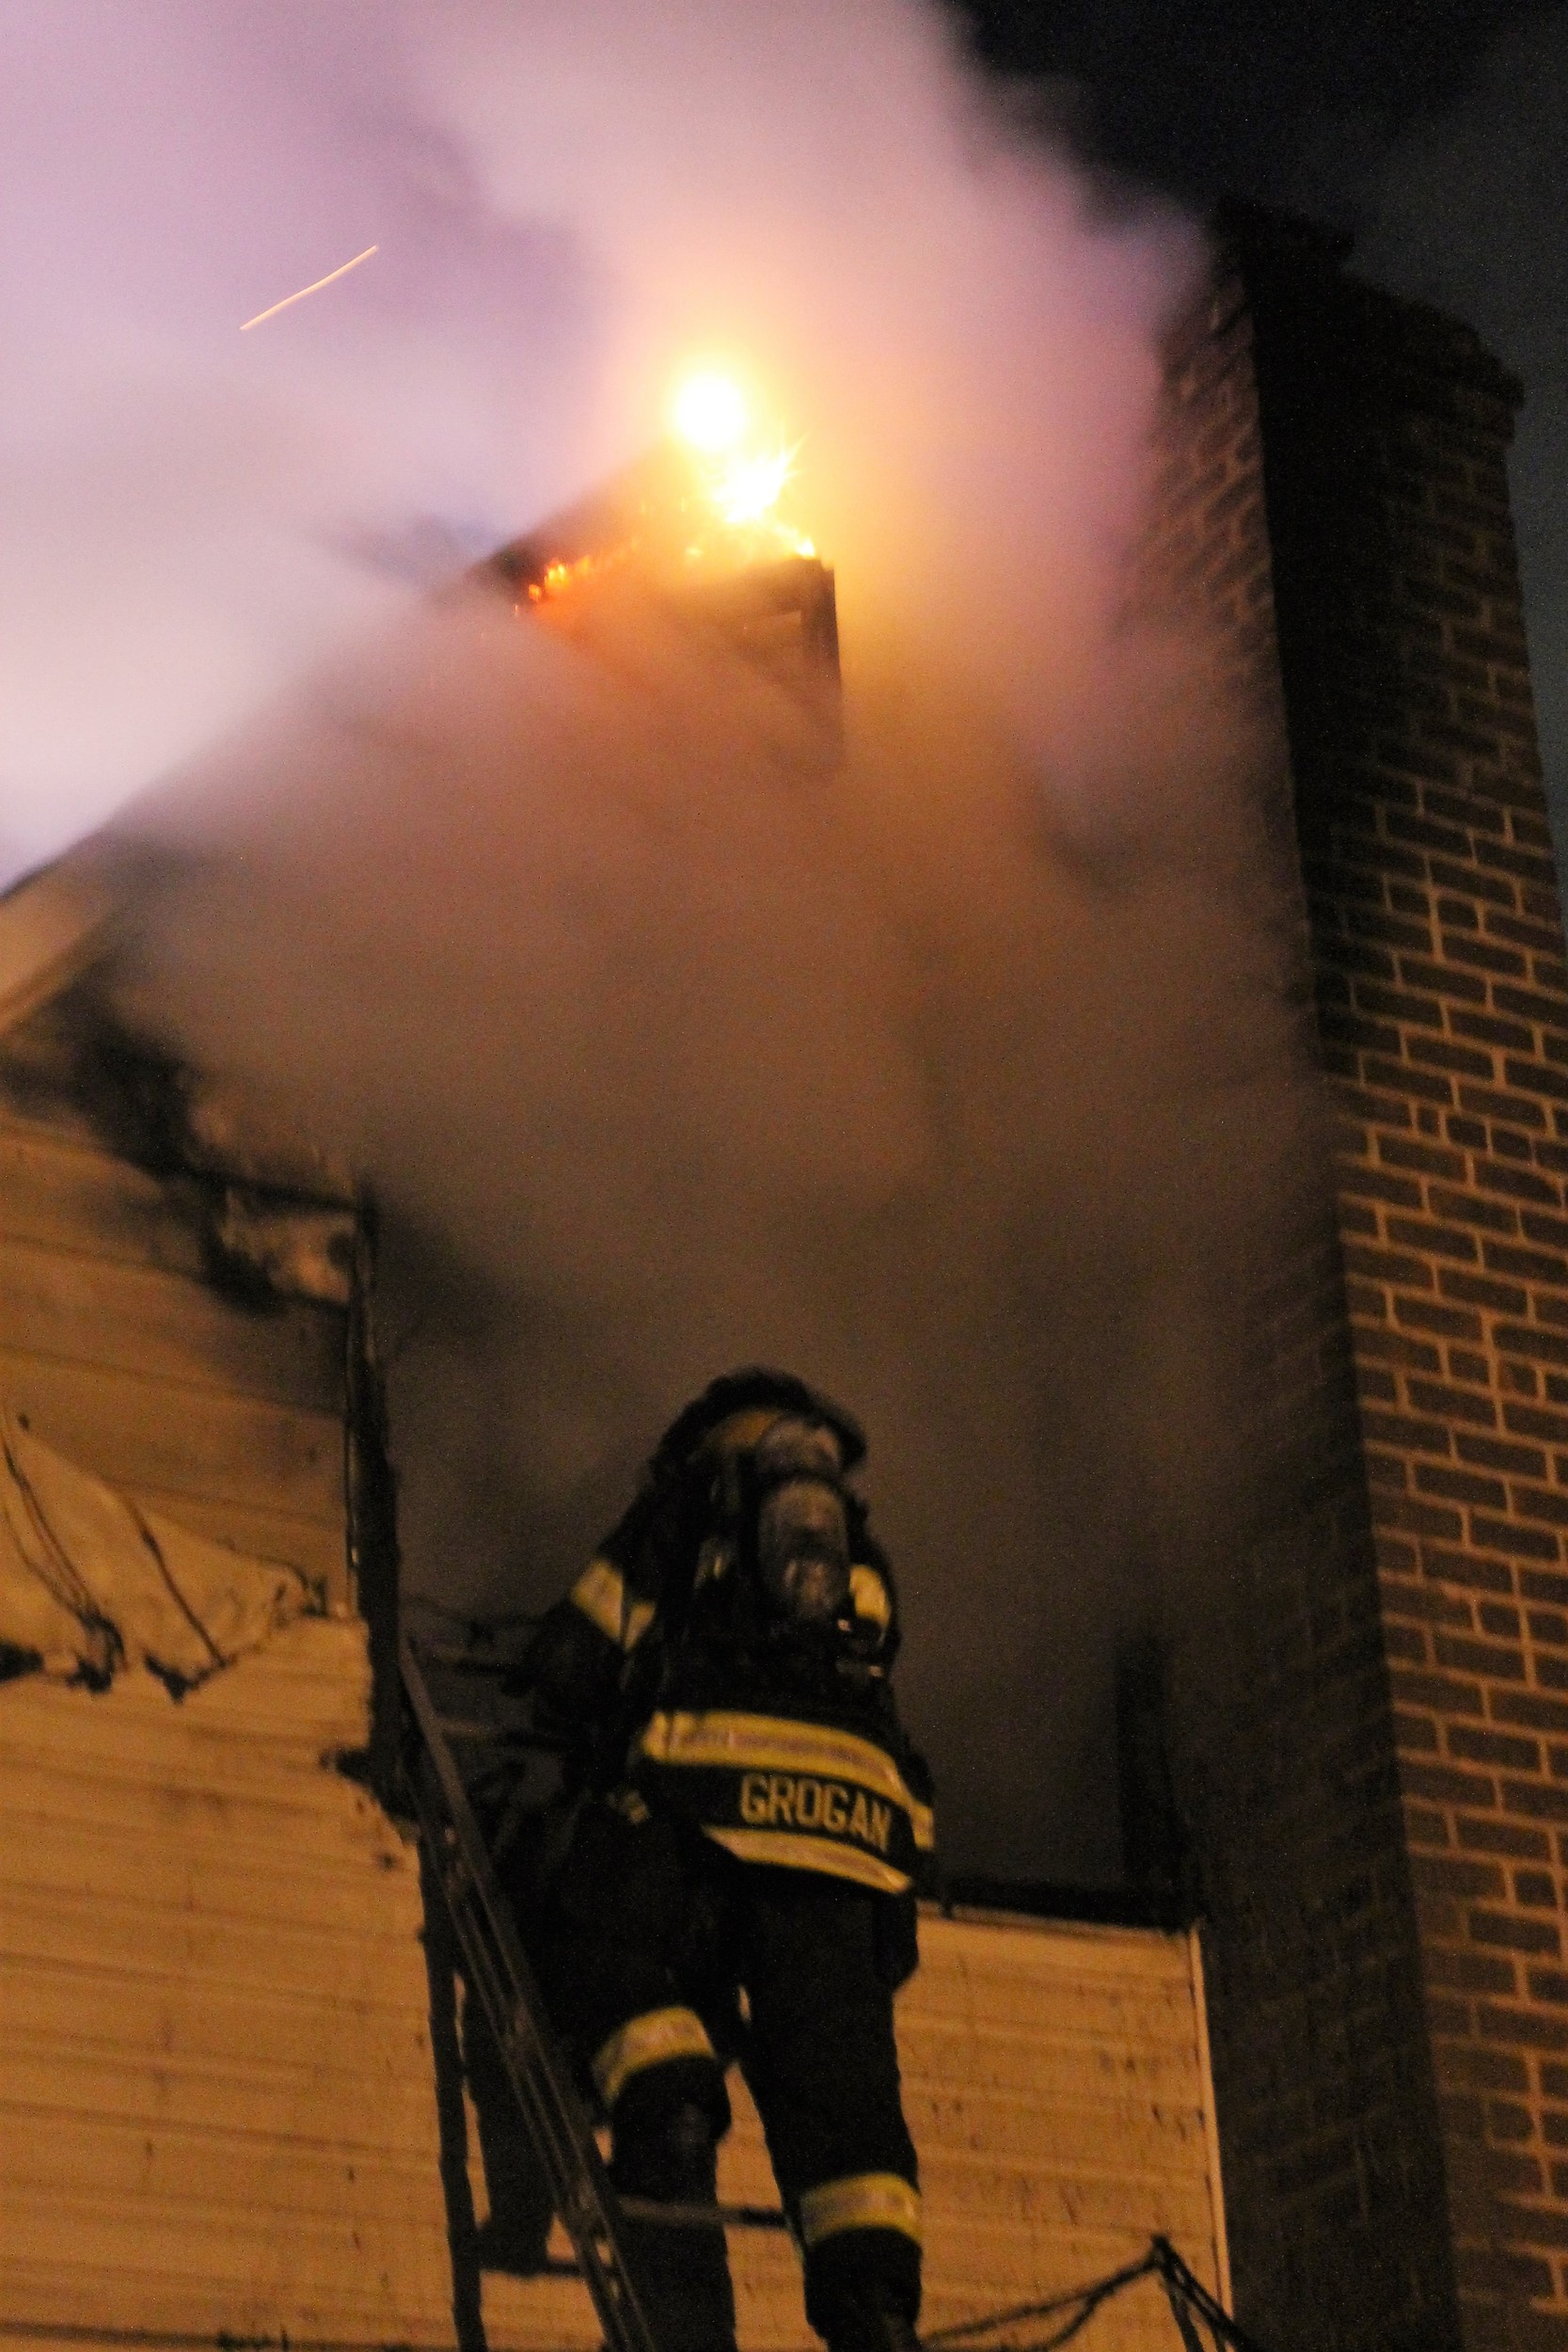 A firefighter scaled the side of the home to tend to the second story fire.